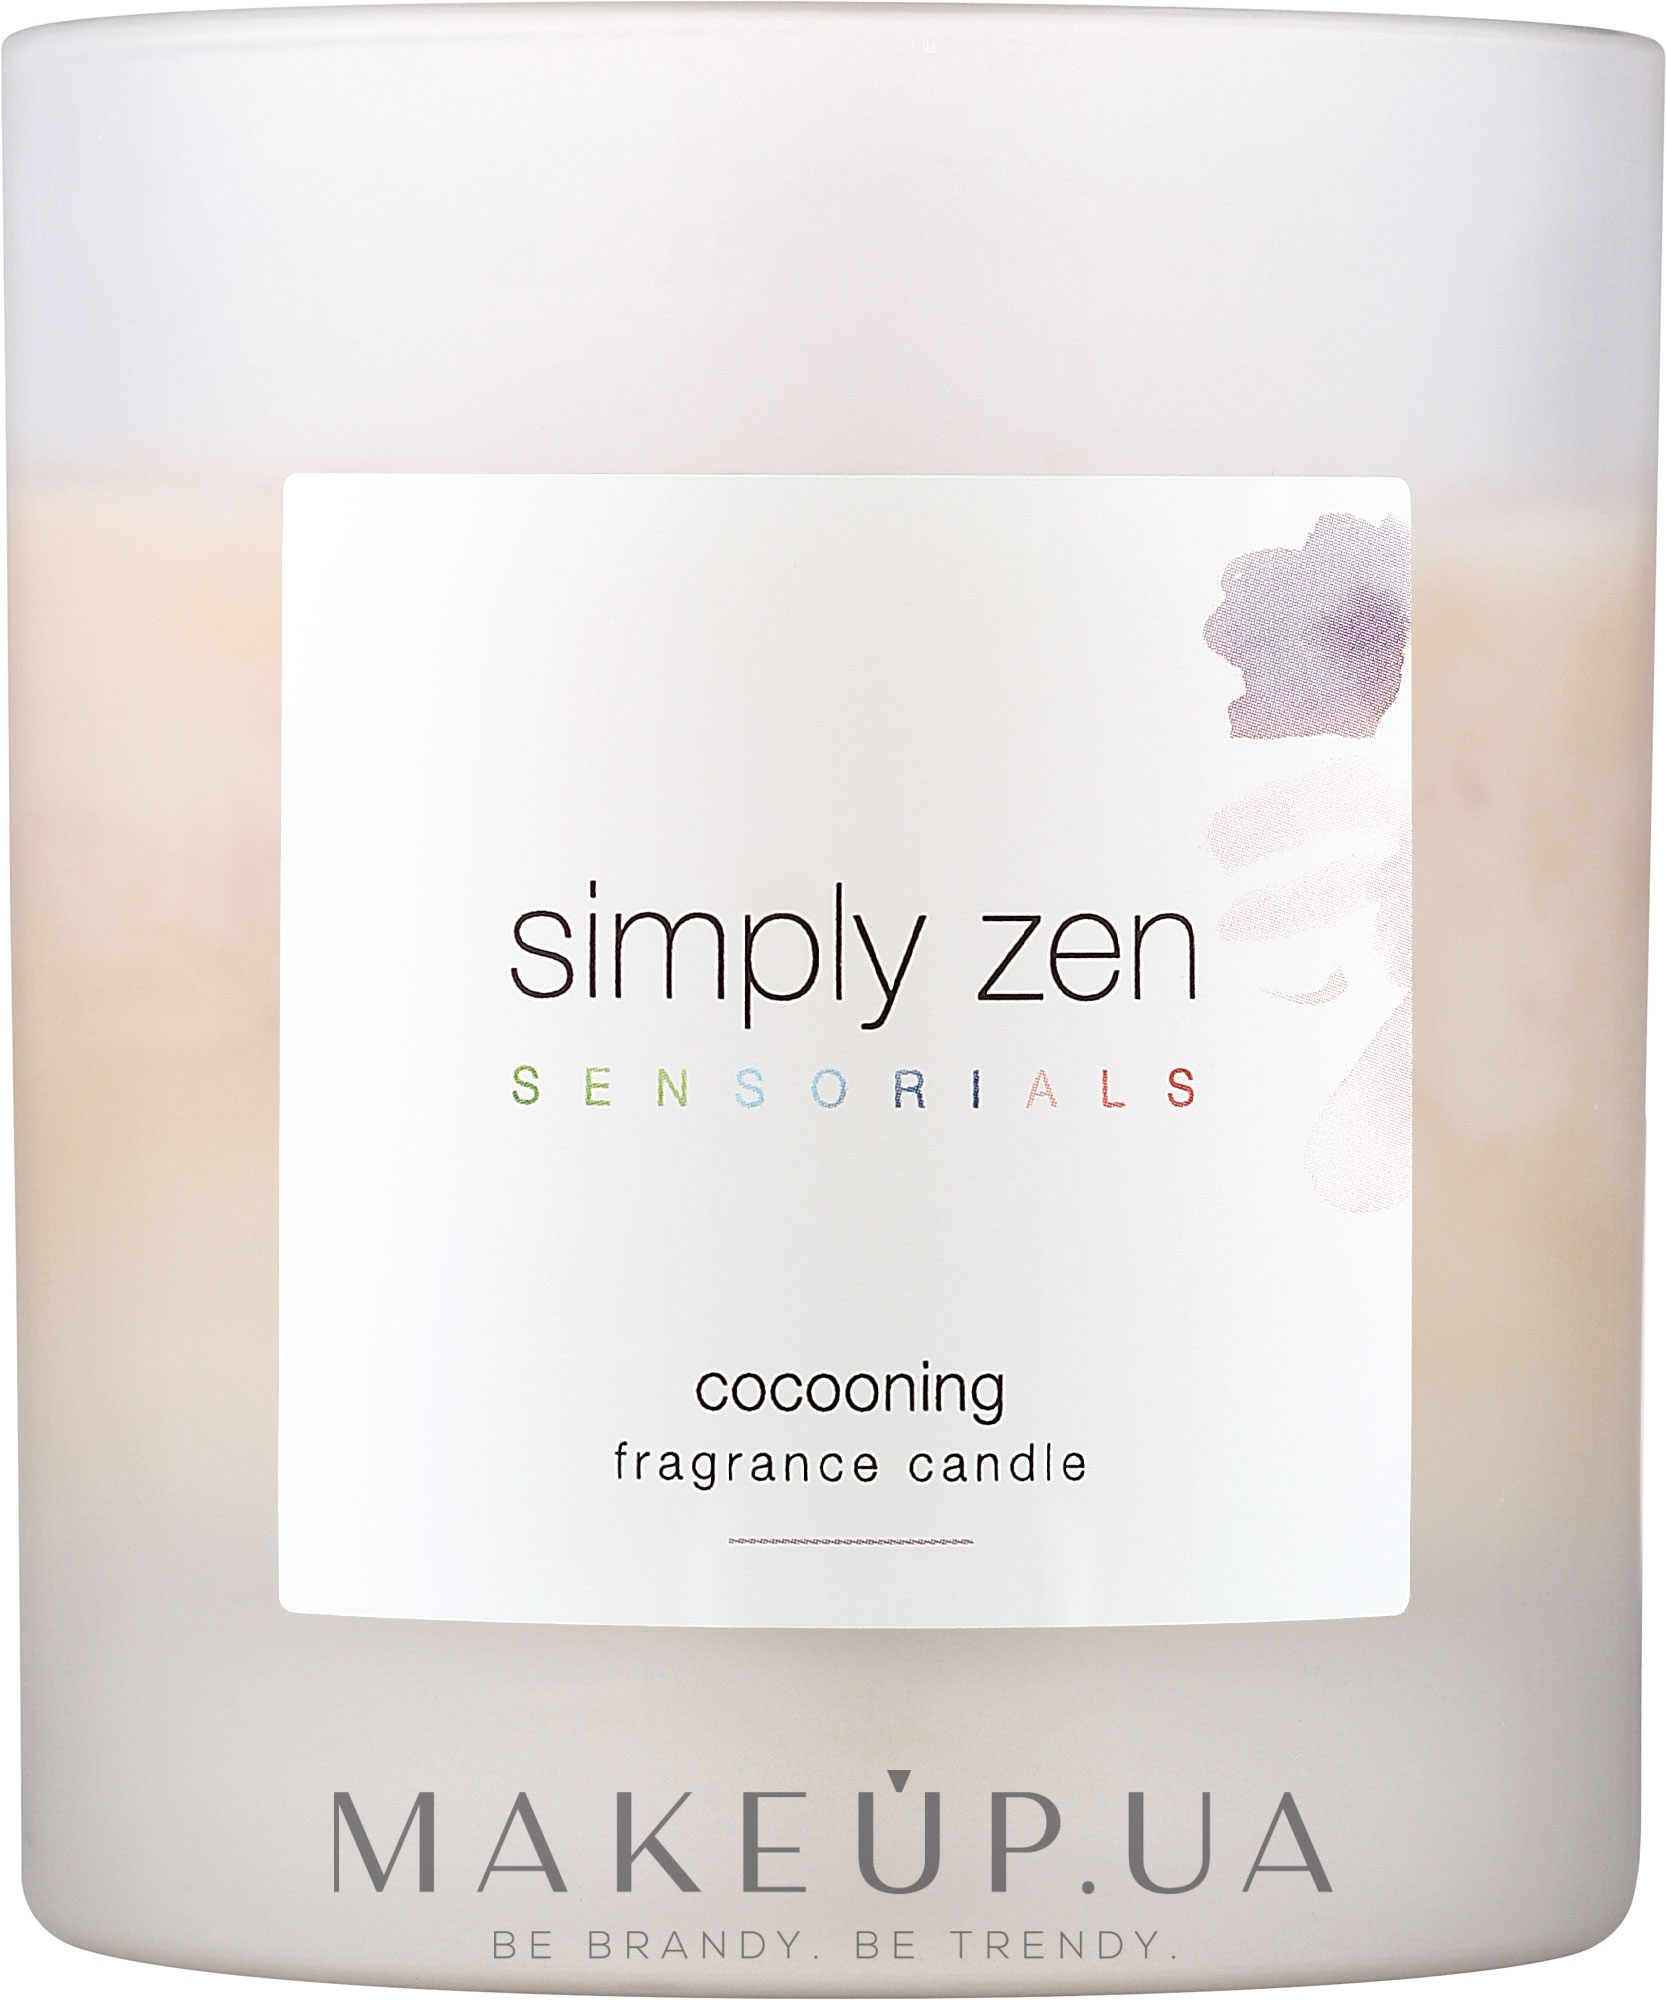 Ароматична свічка - Z. One Concept Simply Zen Sensorials Cocooning Fragrance Candle — фото 240g